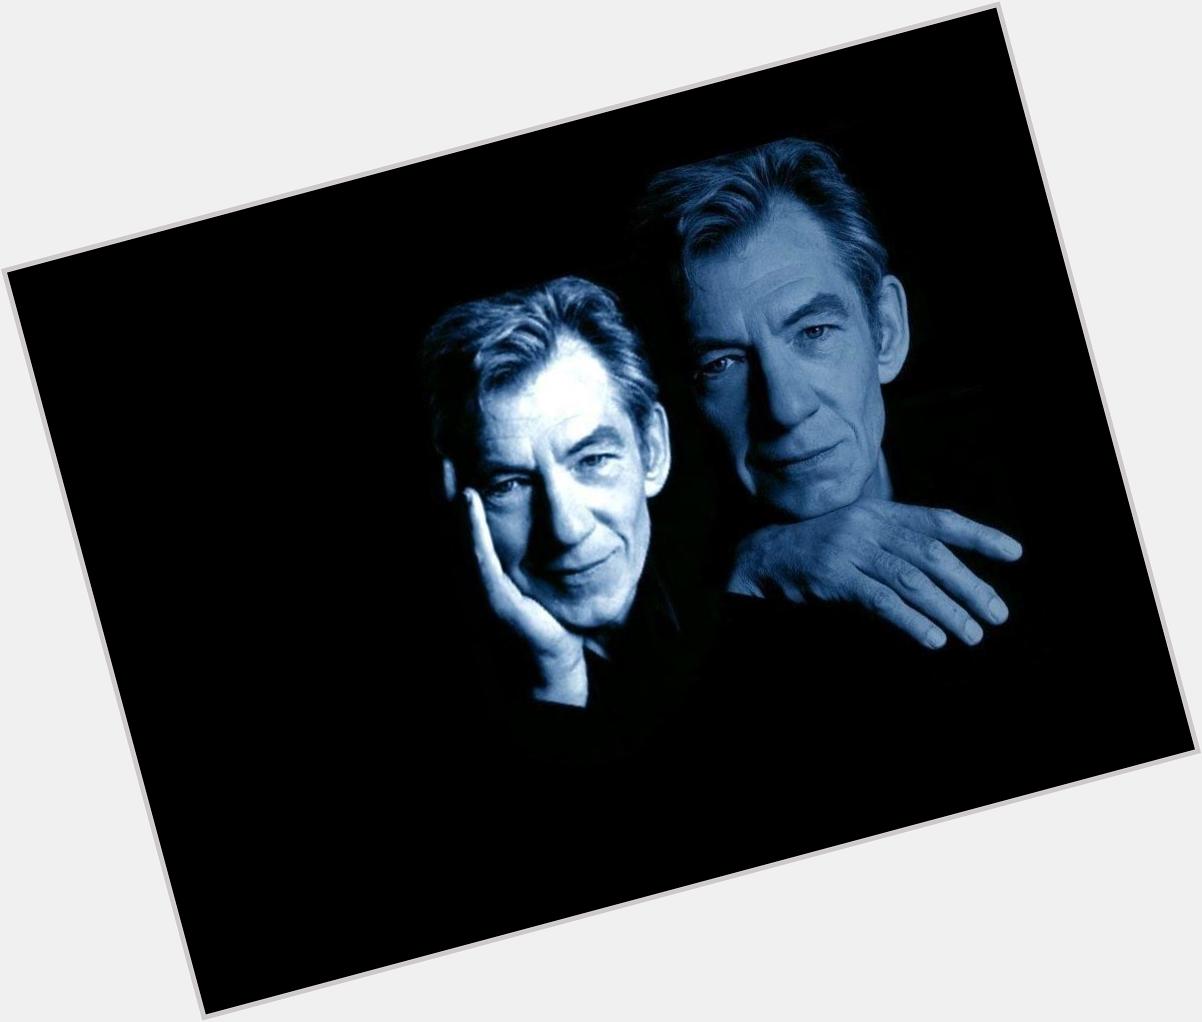 Happy Birthday to Sir Ian McKellen who provides me with inspiration at his age and for what he stands for. 